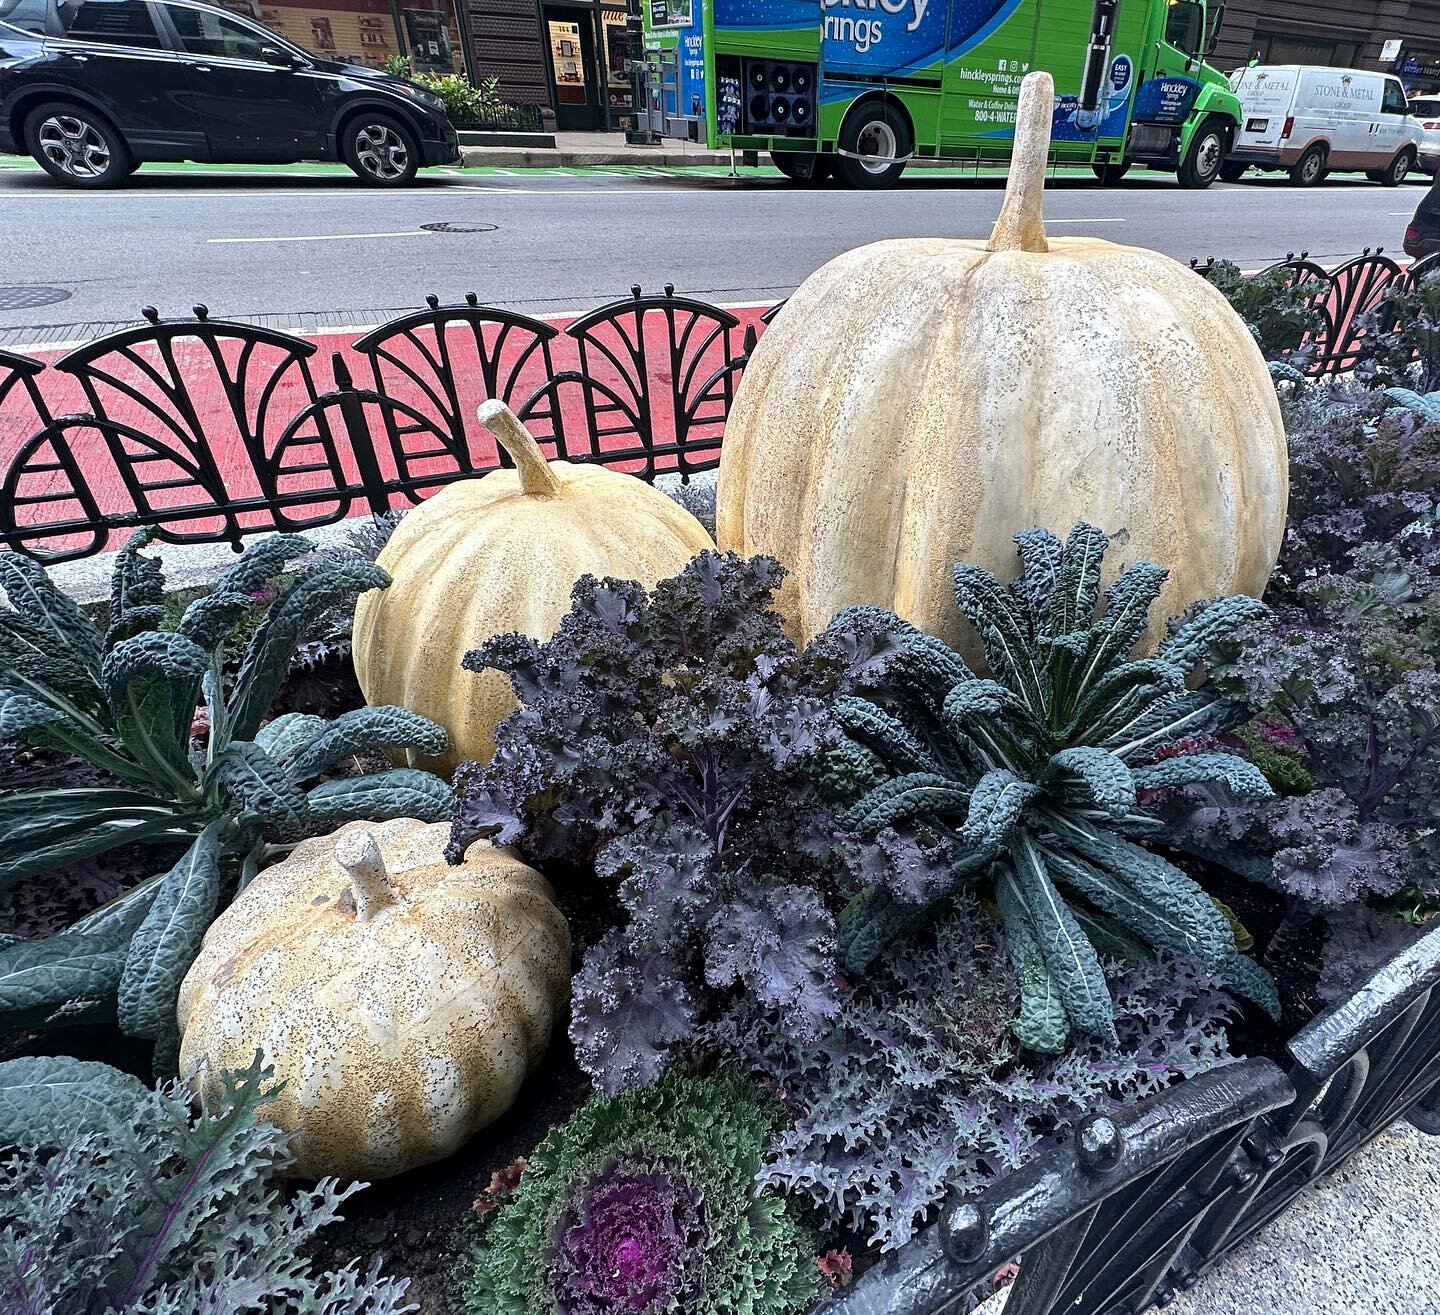 All the fall food. 

#pumpkins #cabbage #kale #chicagolandscaping #landscaping #chicagoplants #urbannature #officeplants